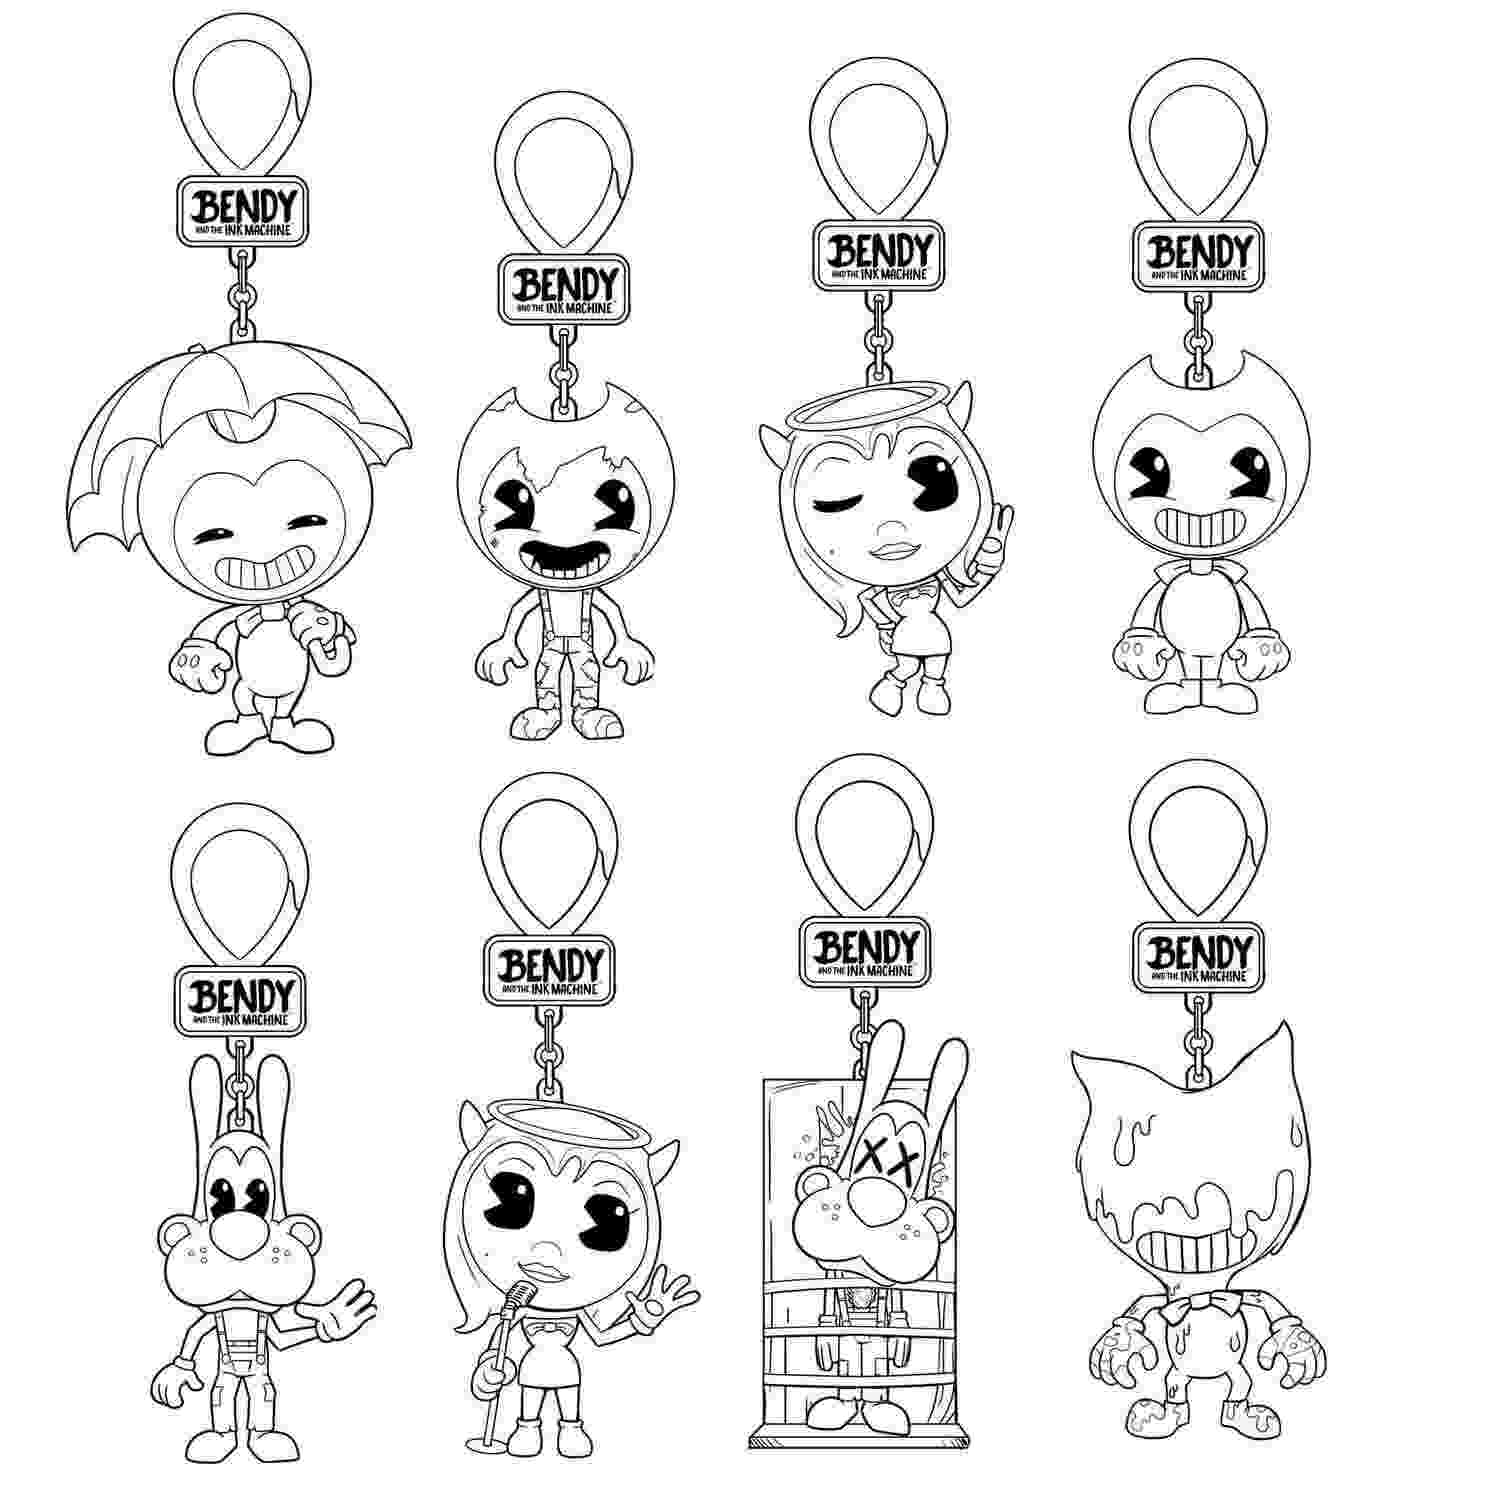 Bendy and the Ink Machine Character Keychains from Bendy